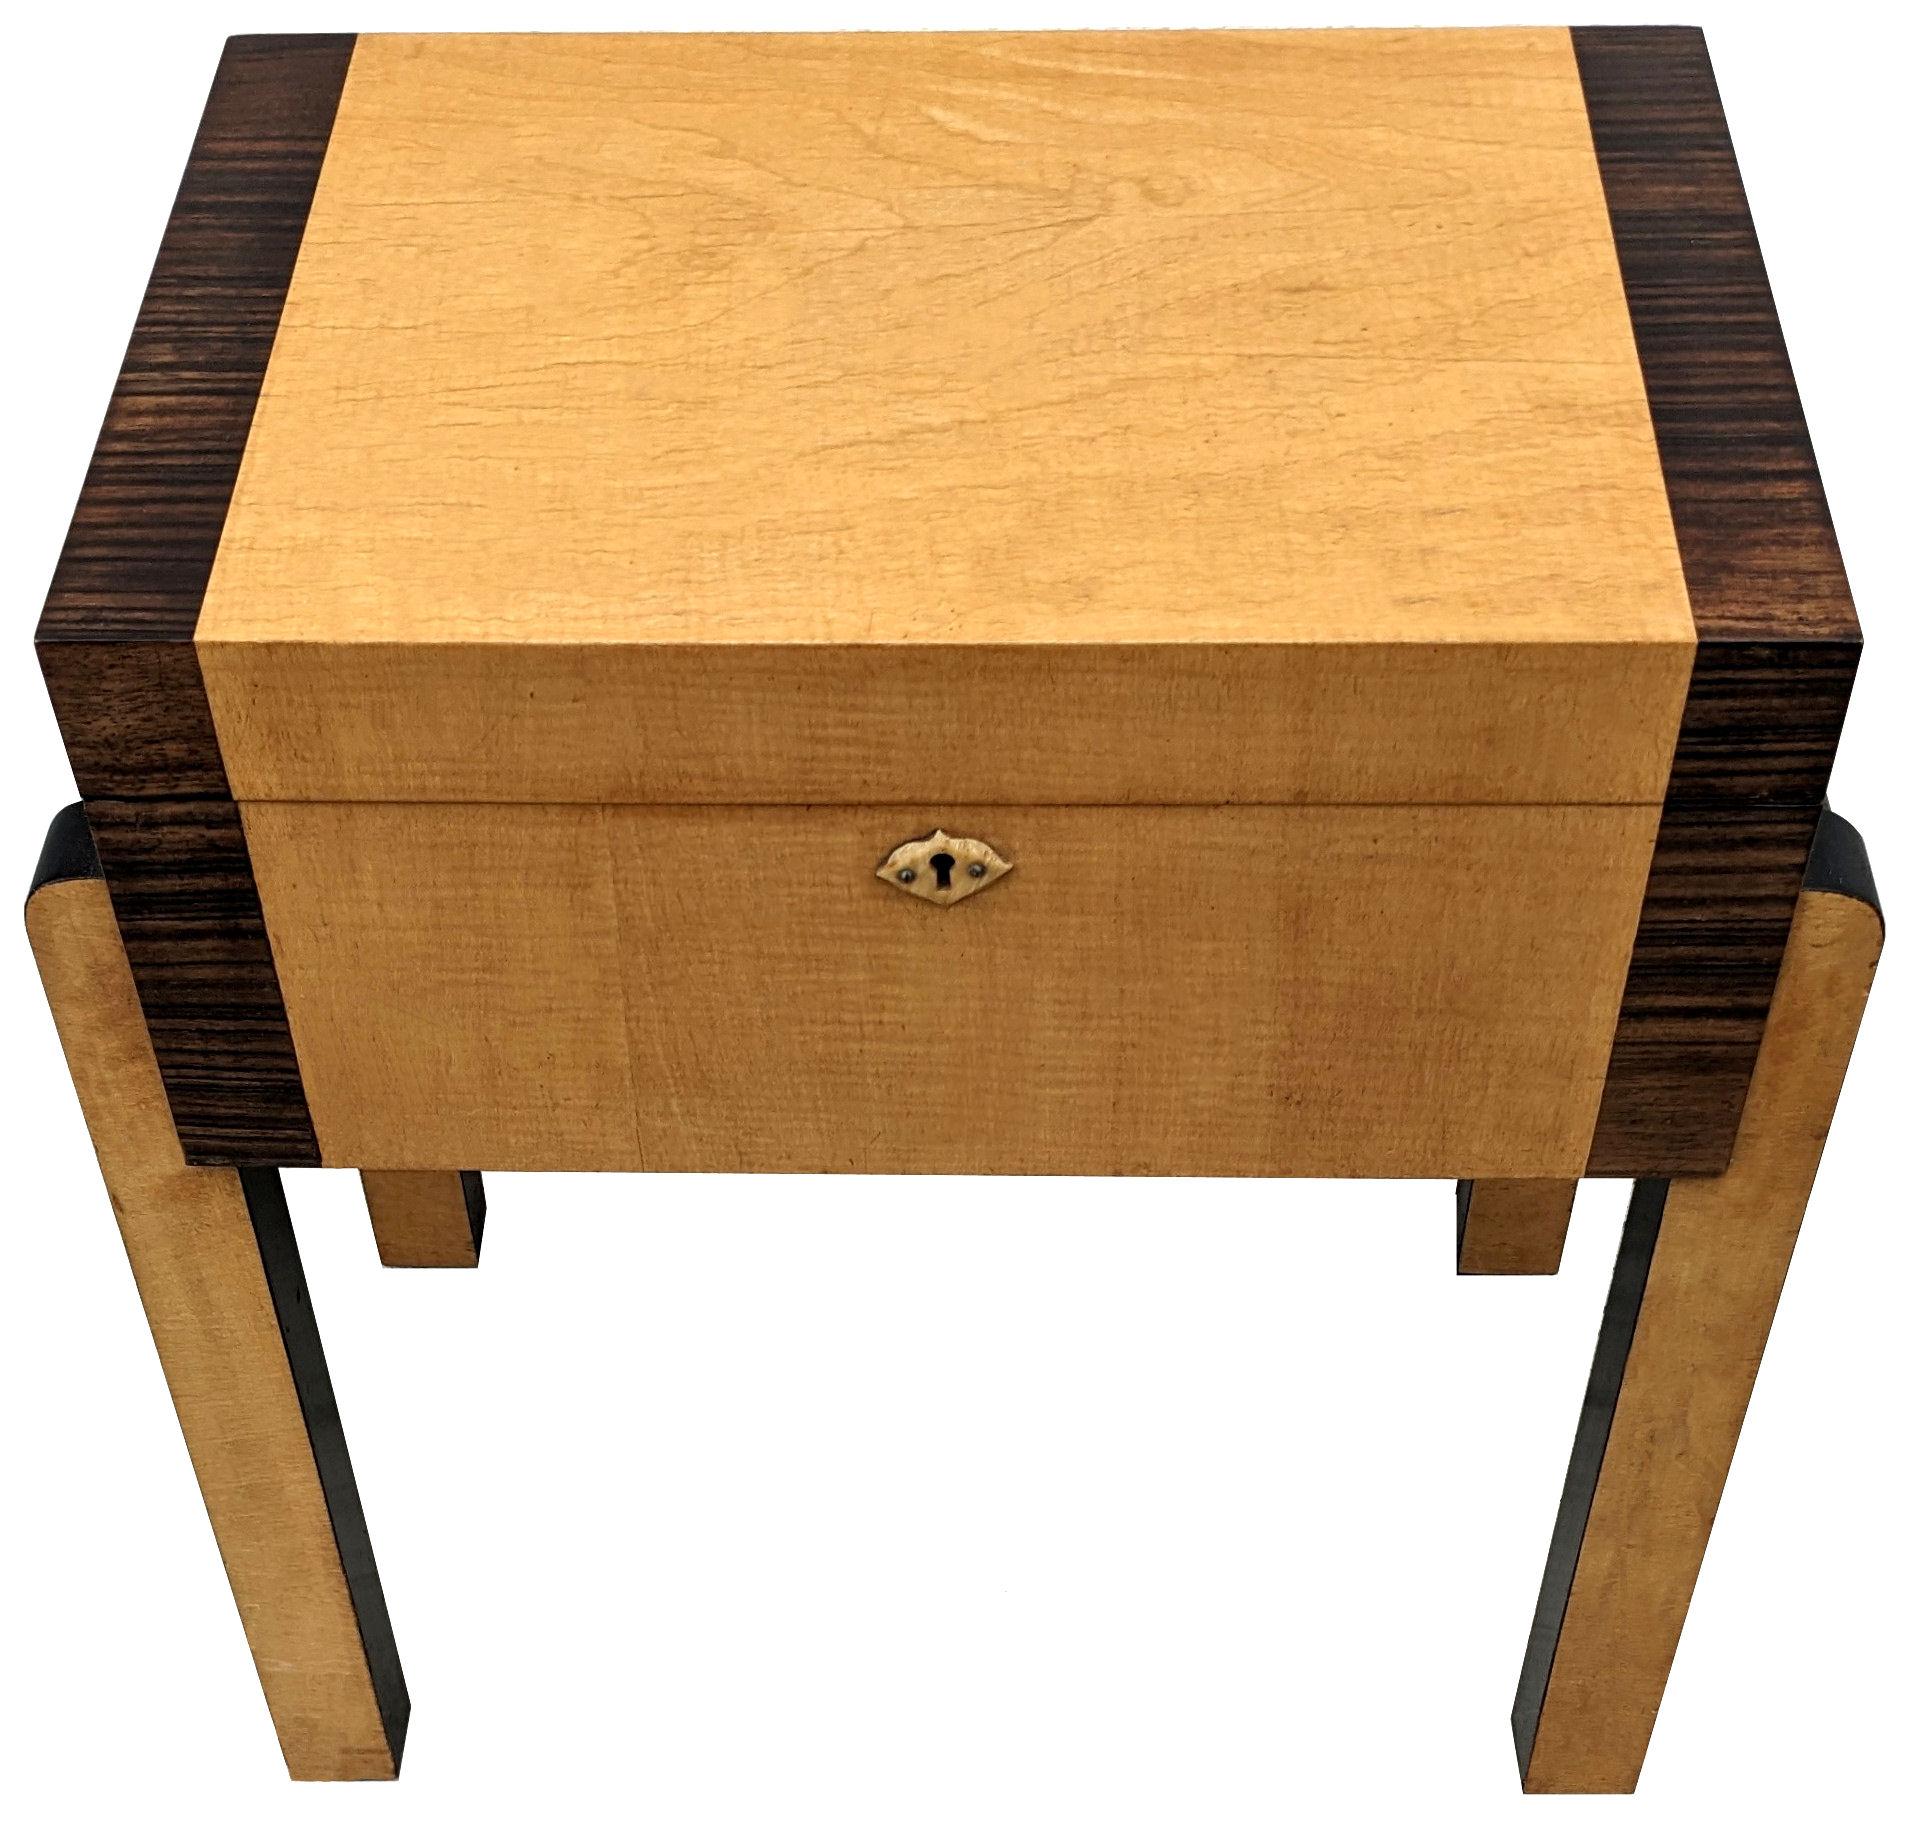 For your consideration is this delightful and superb stylish Art Deco work box table. Originating from England and dating to the 1930's is this lockable work table made from Blonde Satinwood with walnut feather banding and ebonized edging.